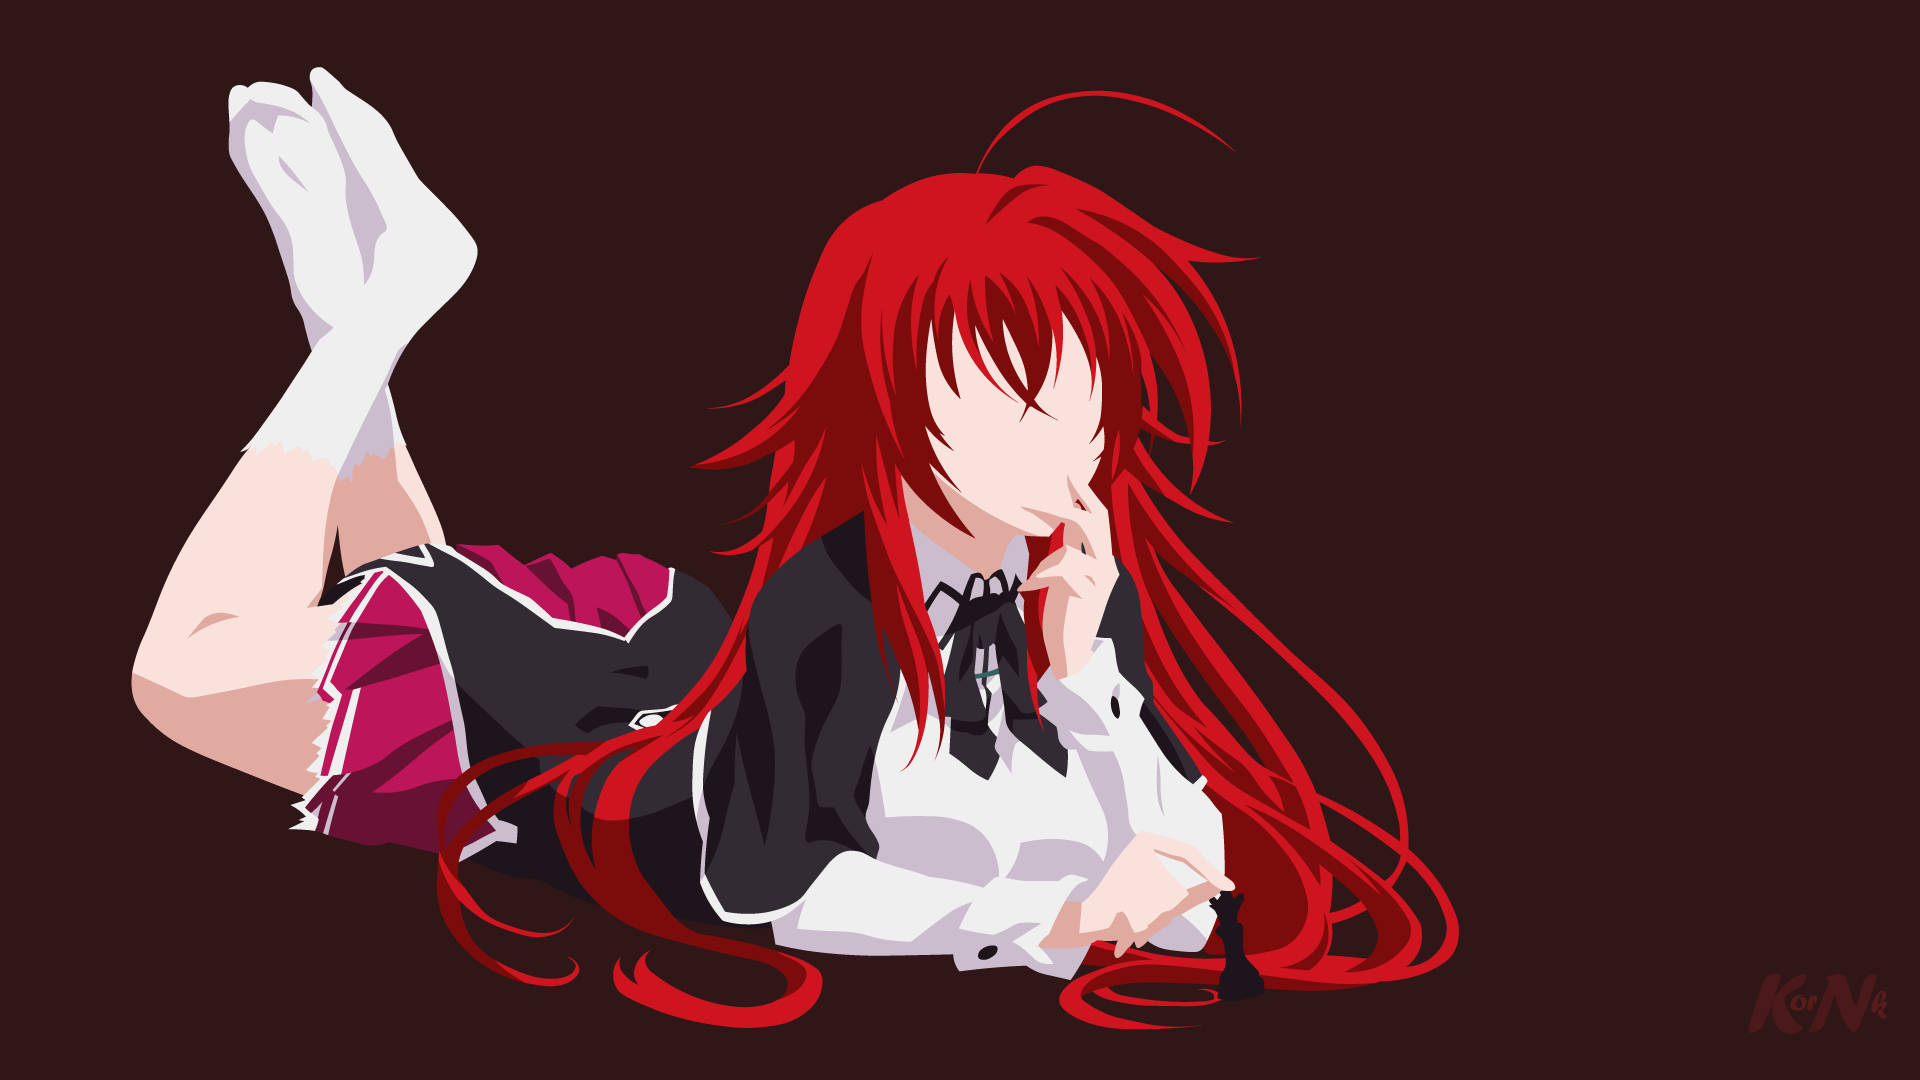 A Minimalistic Take On Rias From The Popular Anime Series Highschool Dxd Background